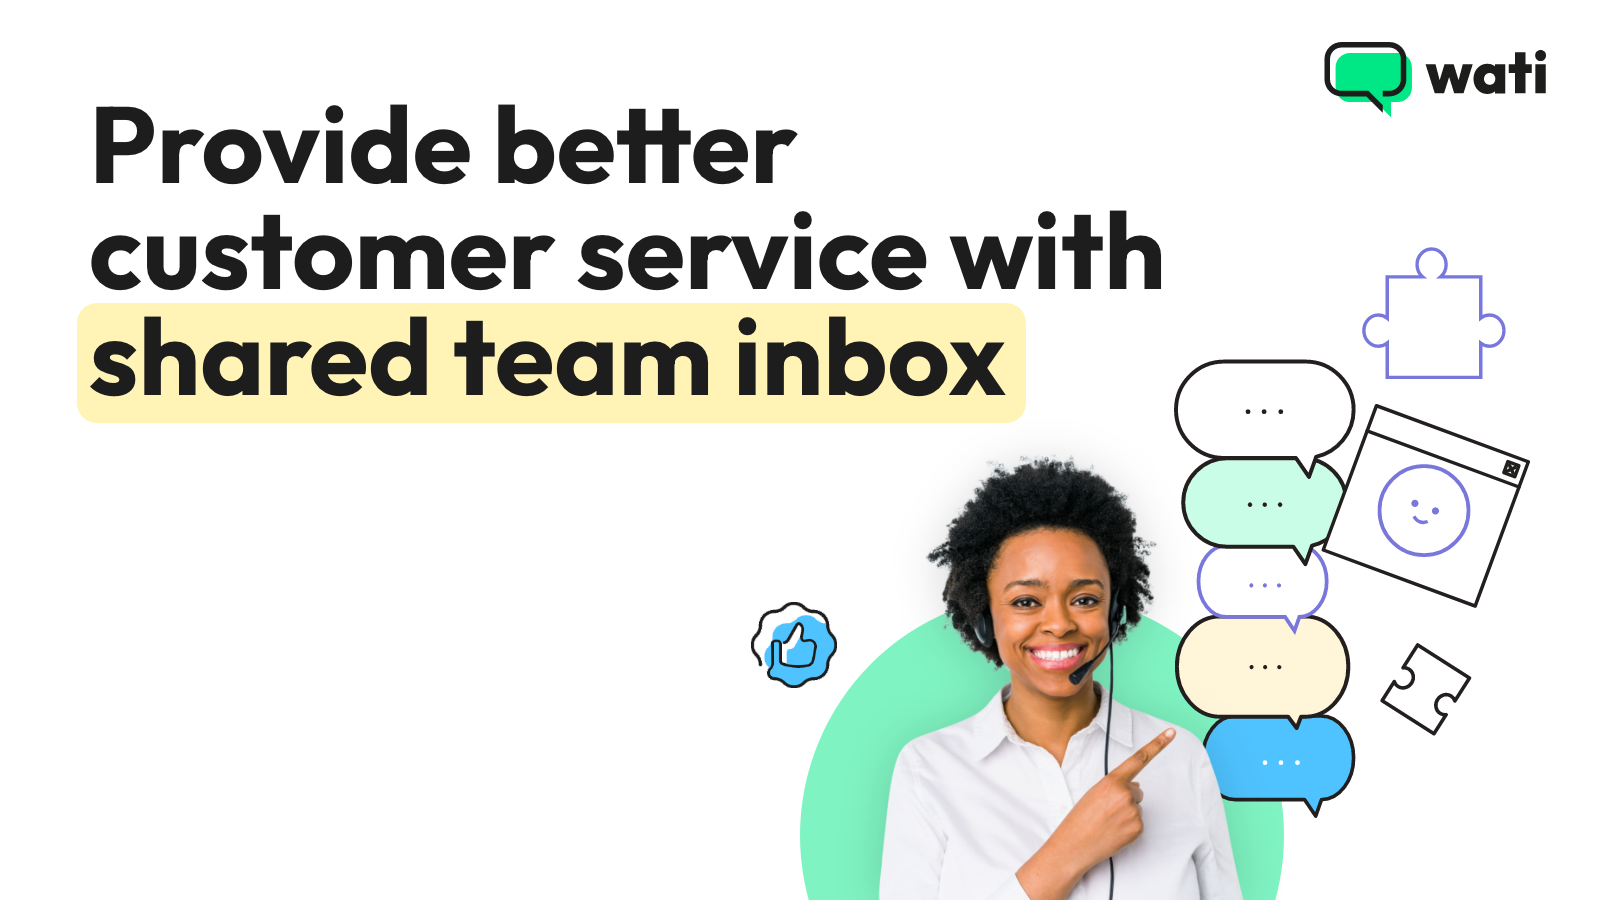 Provide better customer service with shared team inbox